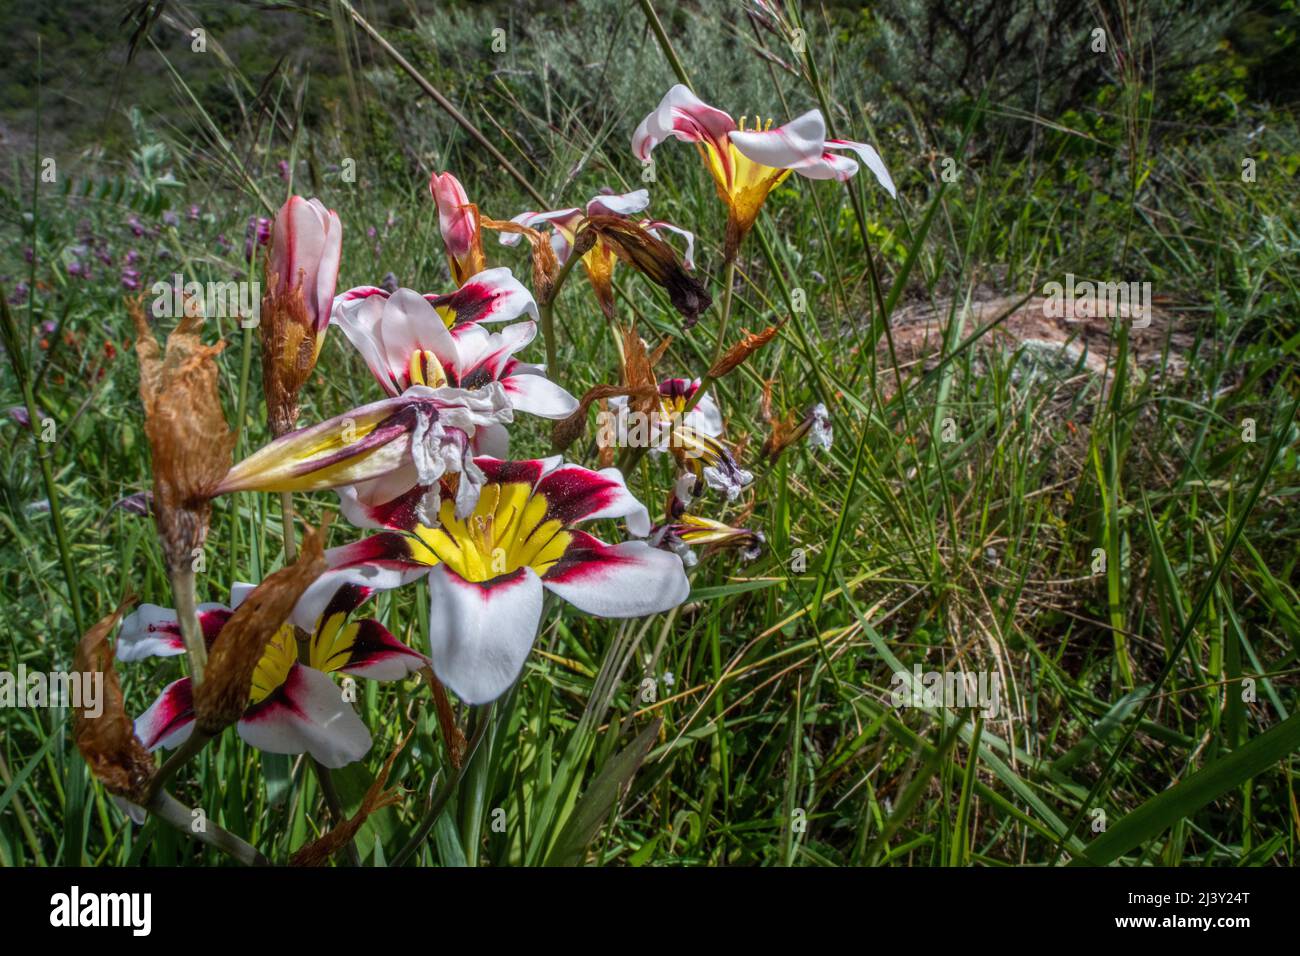 Harlequin flower (Sparaxis tricolor) a vibrant nonnative wildflower growing in the San Francisco area introduced to California from South Africa. Stock Photo